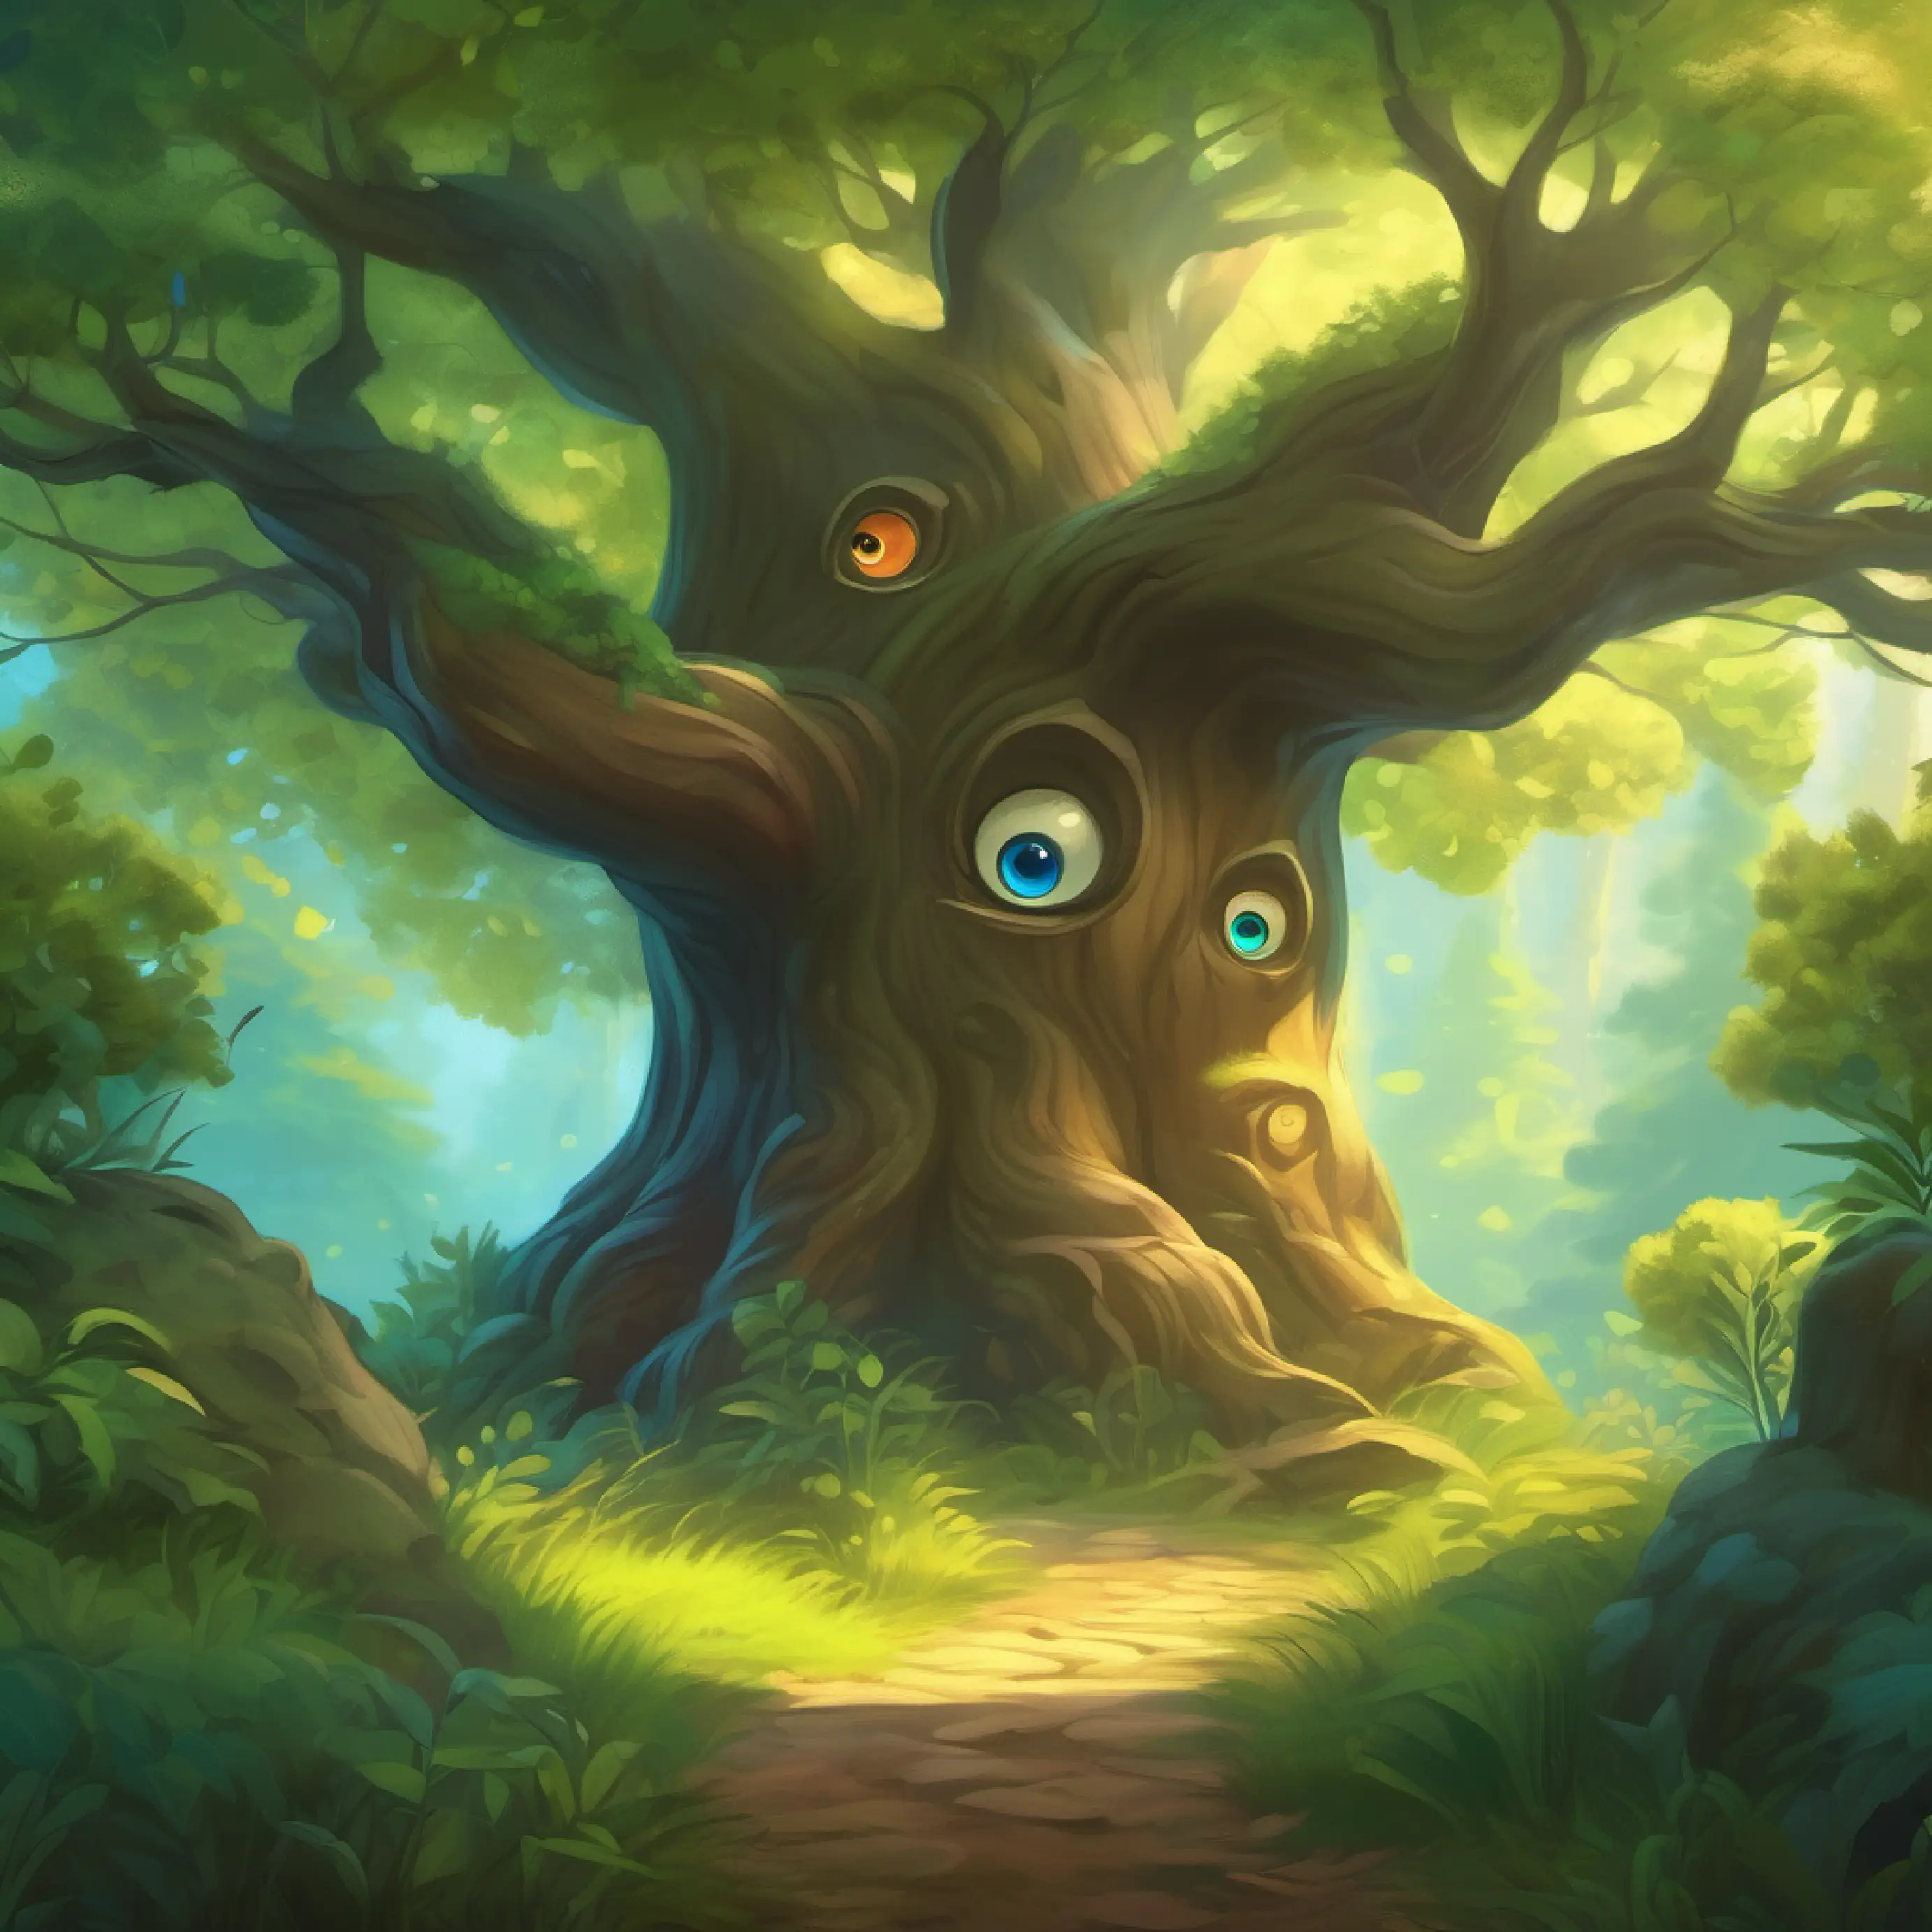 A tree with gentle, knowing eyes watched over the forest creatures